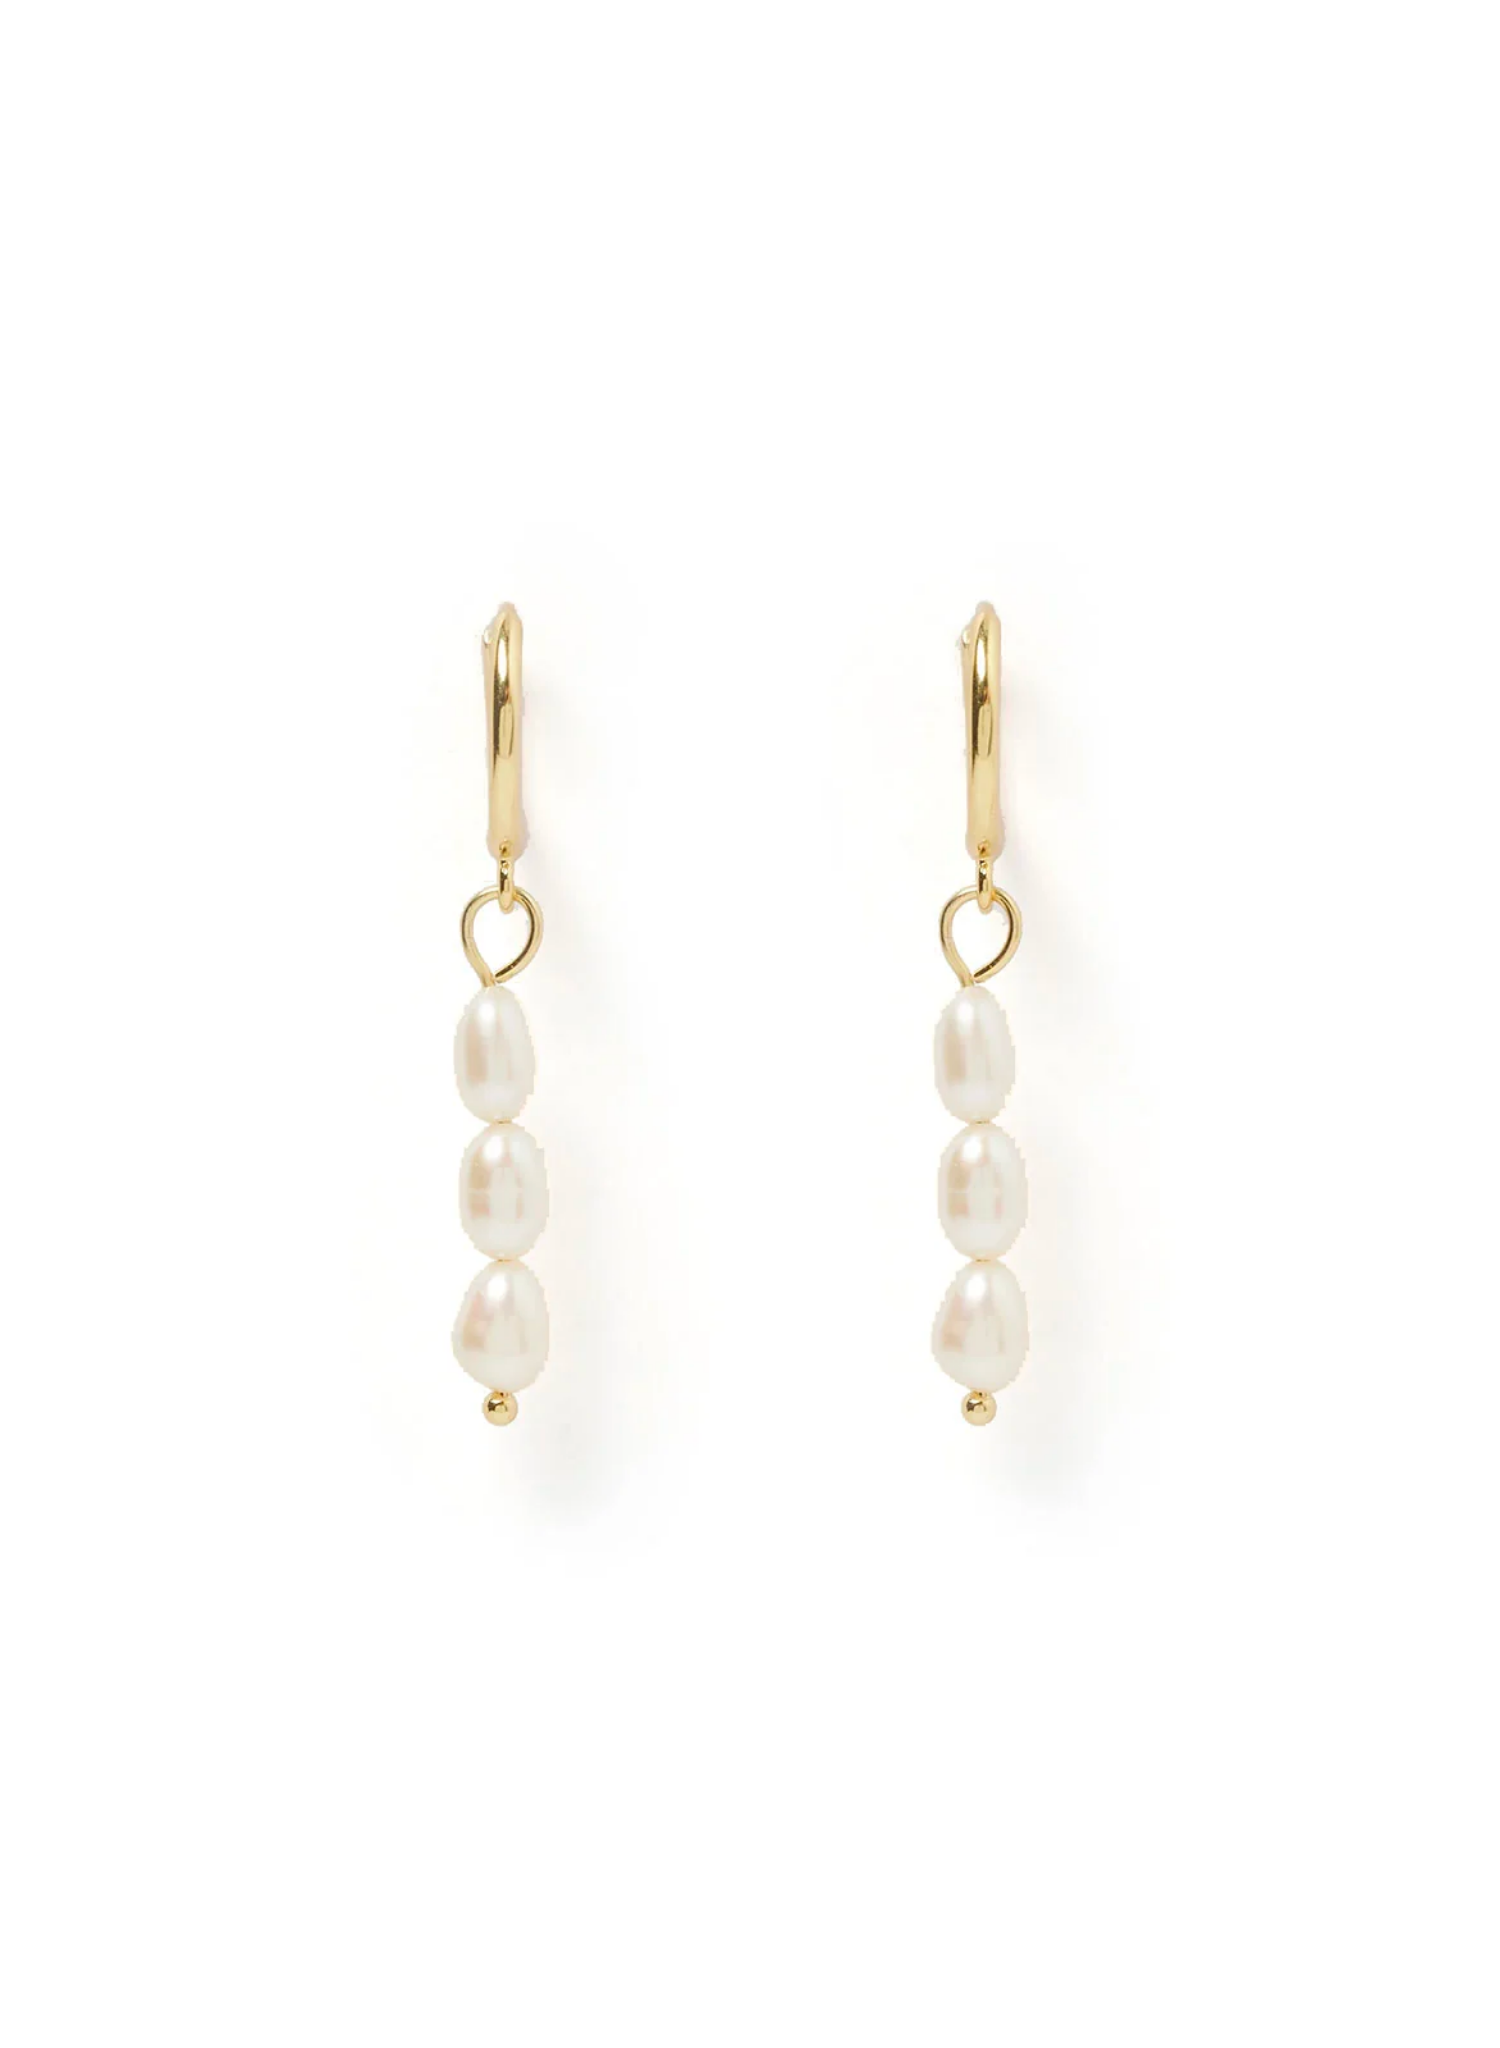 Add a pop to your everyday style with the cute drop-pearl Indiana Earrings. Featuring 3 tiny baroque pearls, dangling from one of our classic gold huggies. These beauties will seamlessly take you from day tonight.